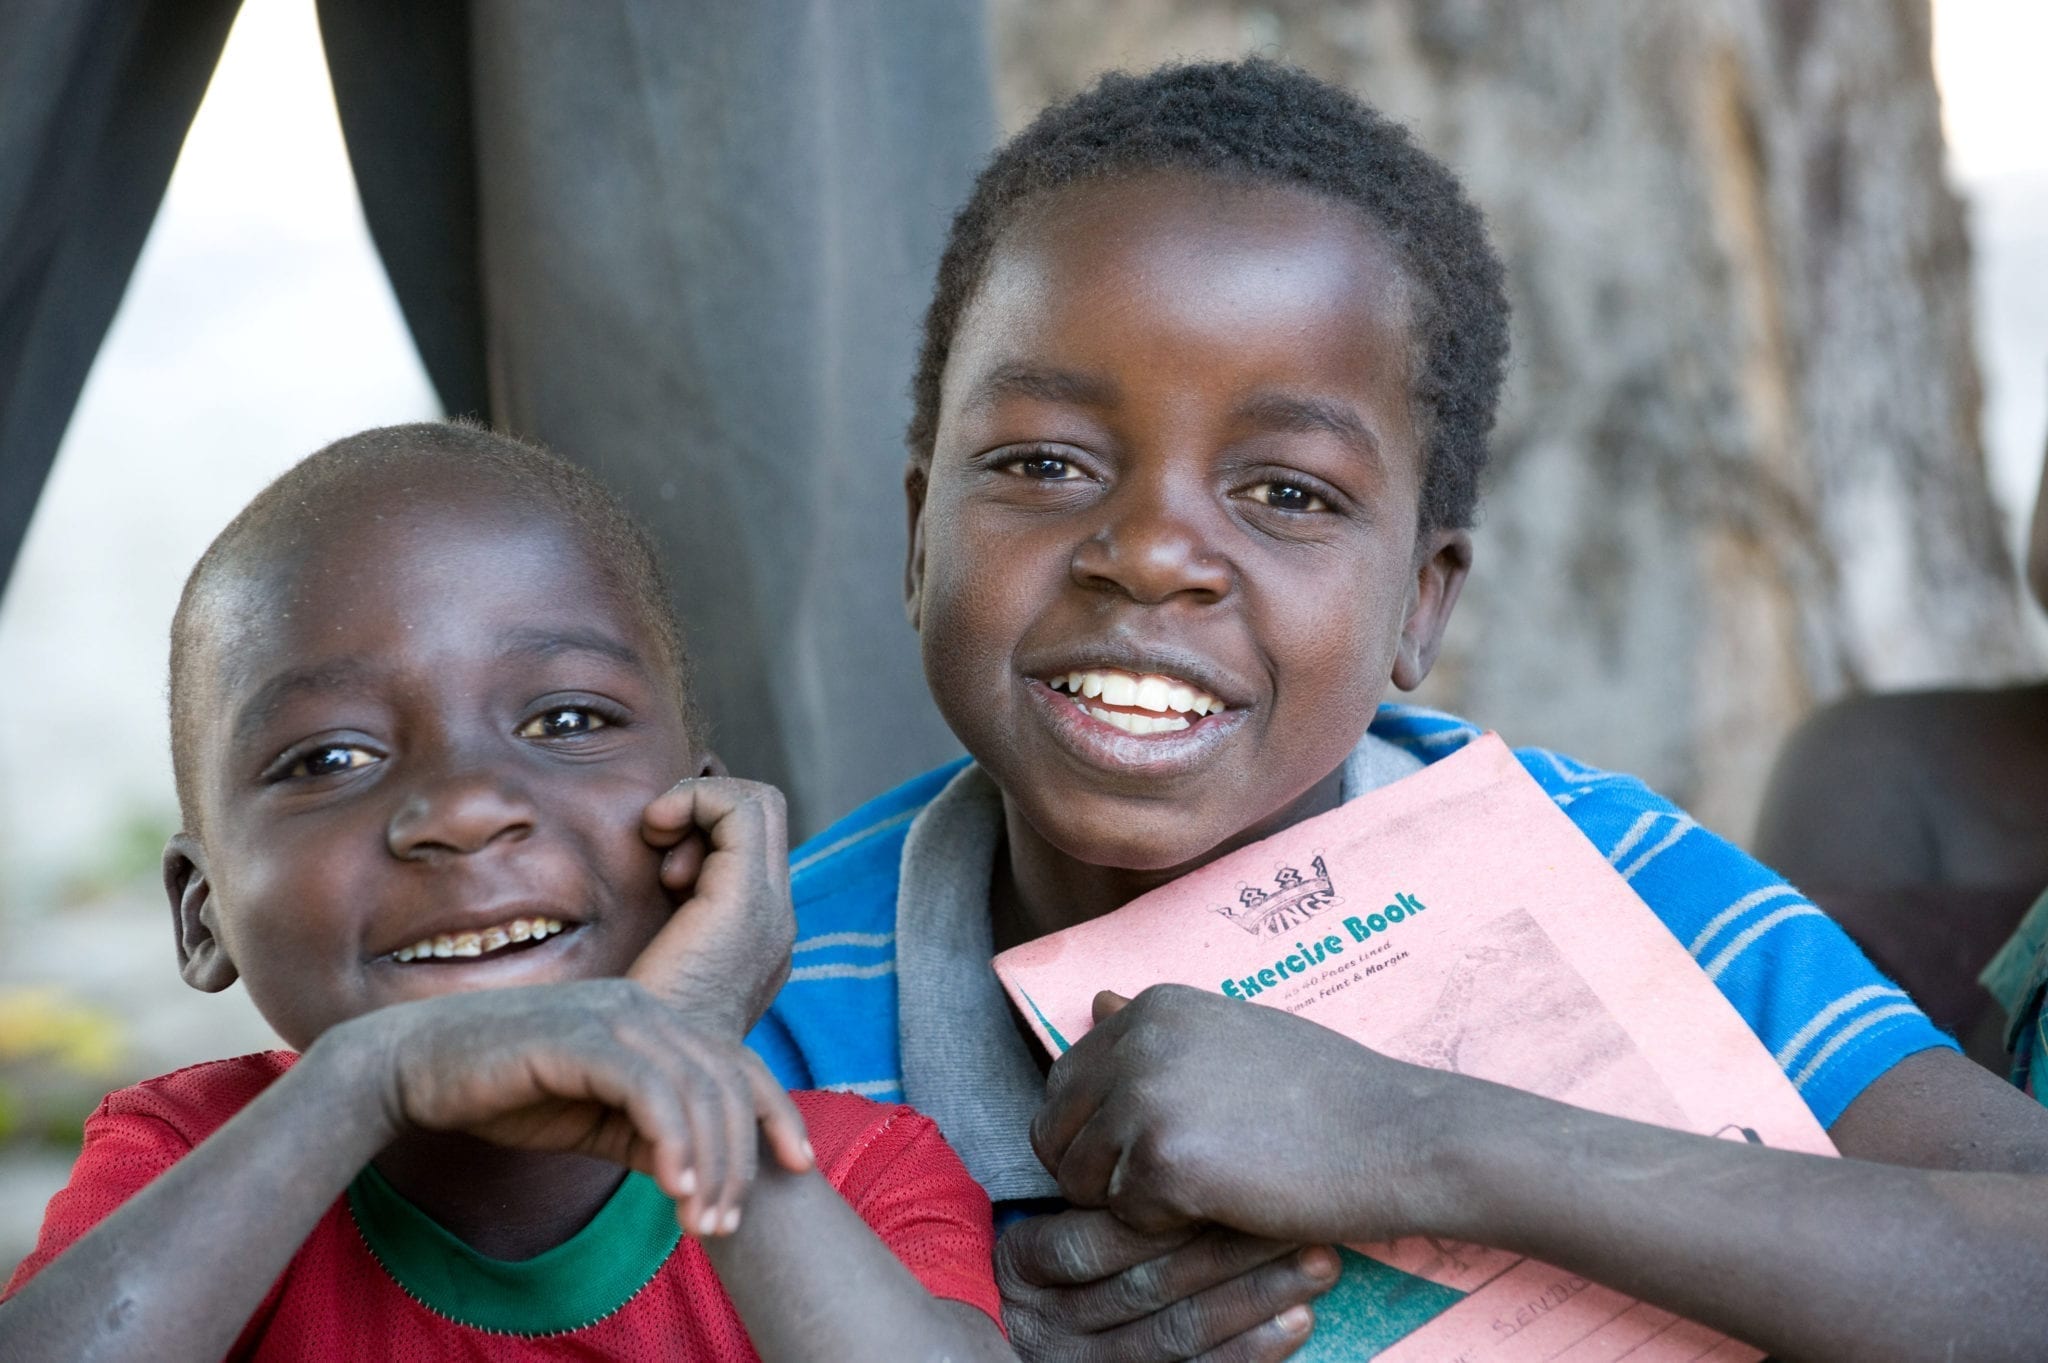 Two boys in Zambia smile as they hold learning materials.